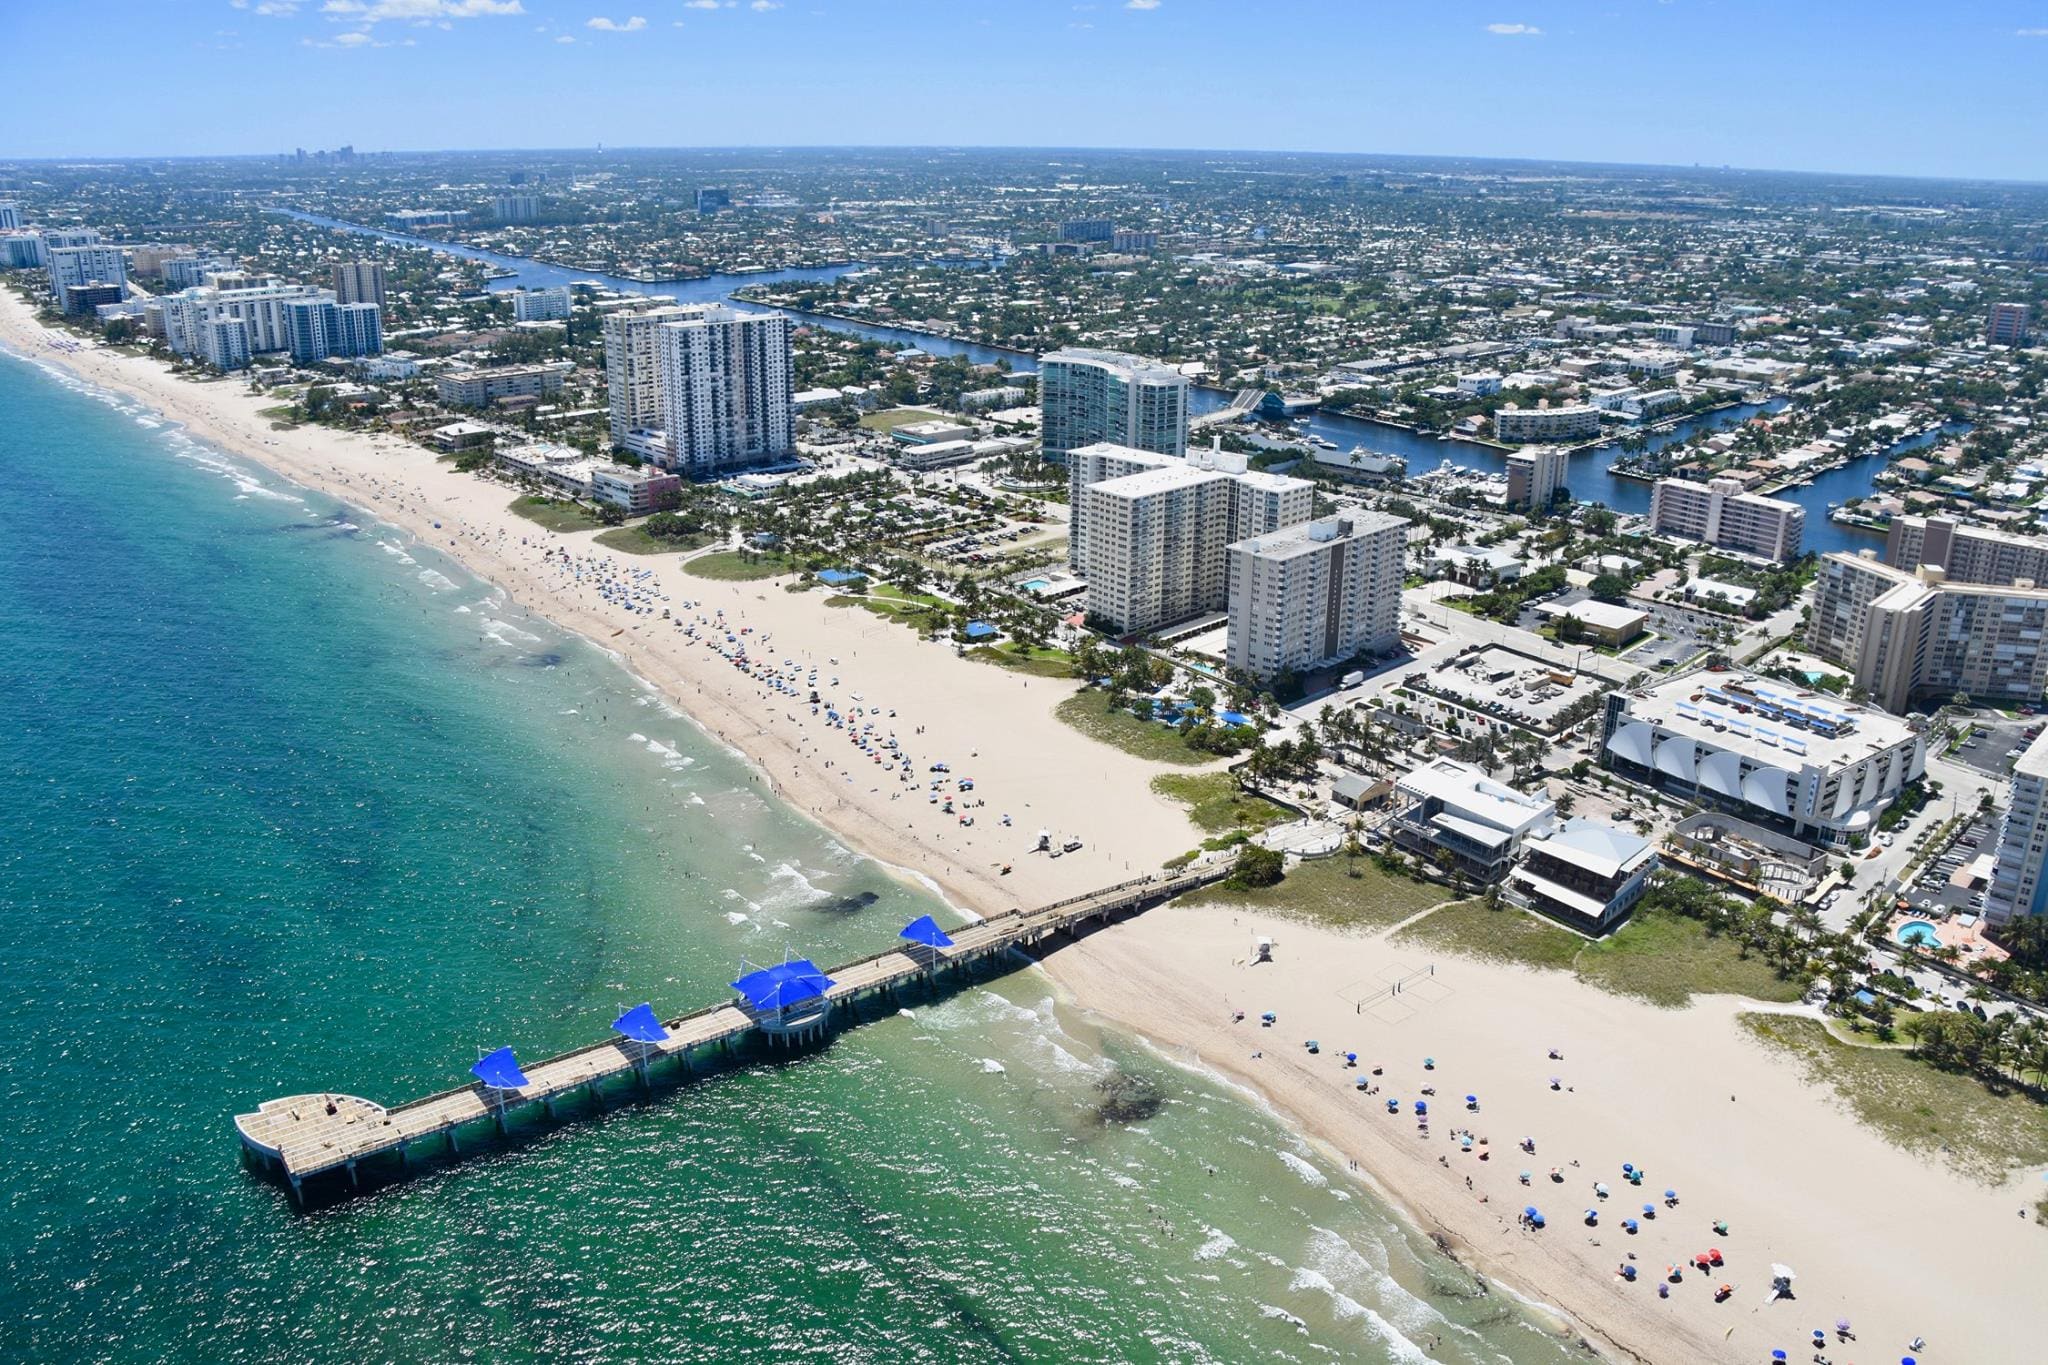 Arial photo of the Pompano Beach Pier area construction. April 2019. Photo by Elaine Fitzgerald